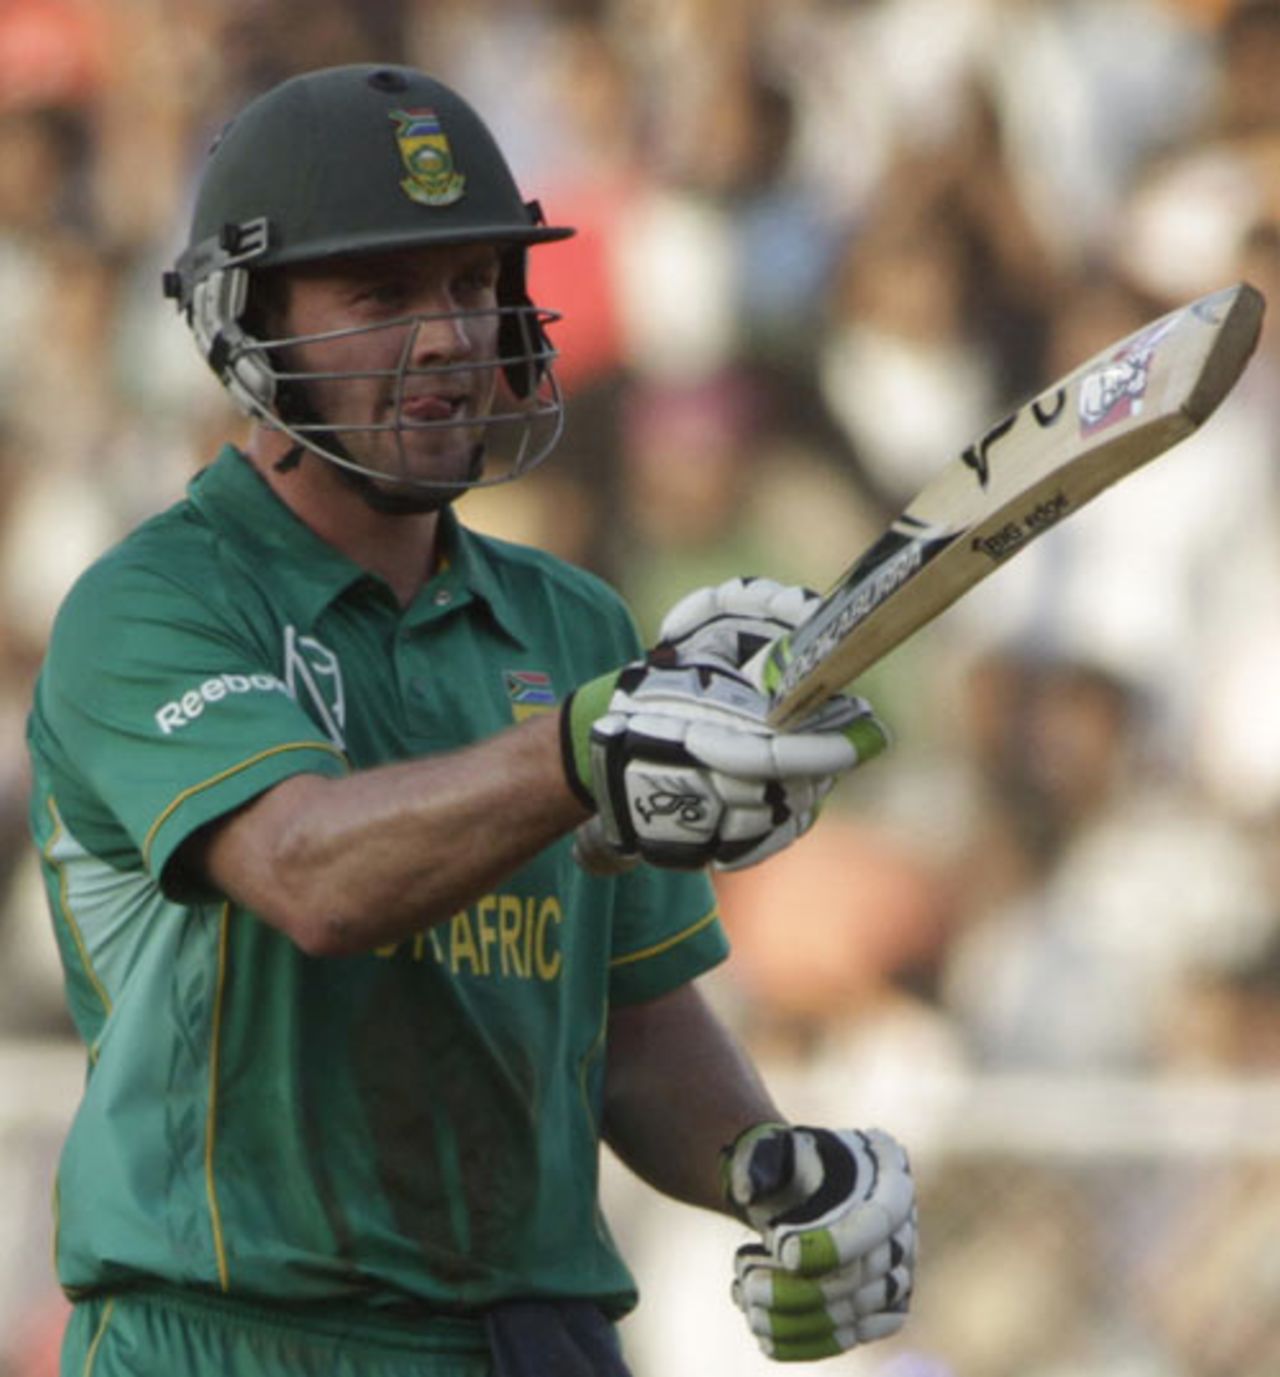 AB de Villiers signals his hundred, India v South Africa, 3rd ODI, Ahmedabad, February 27, 2010